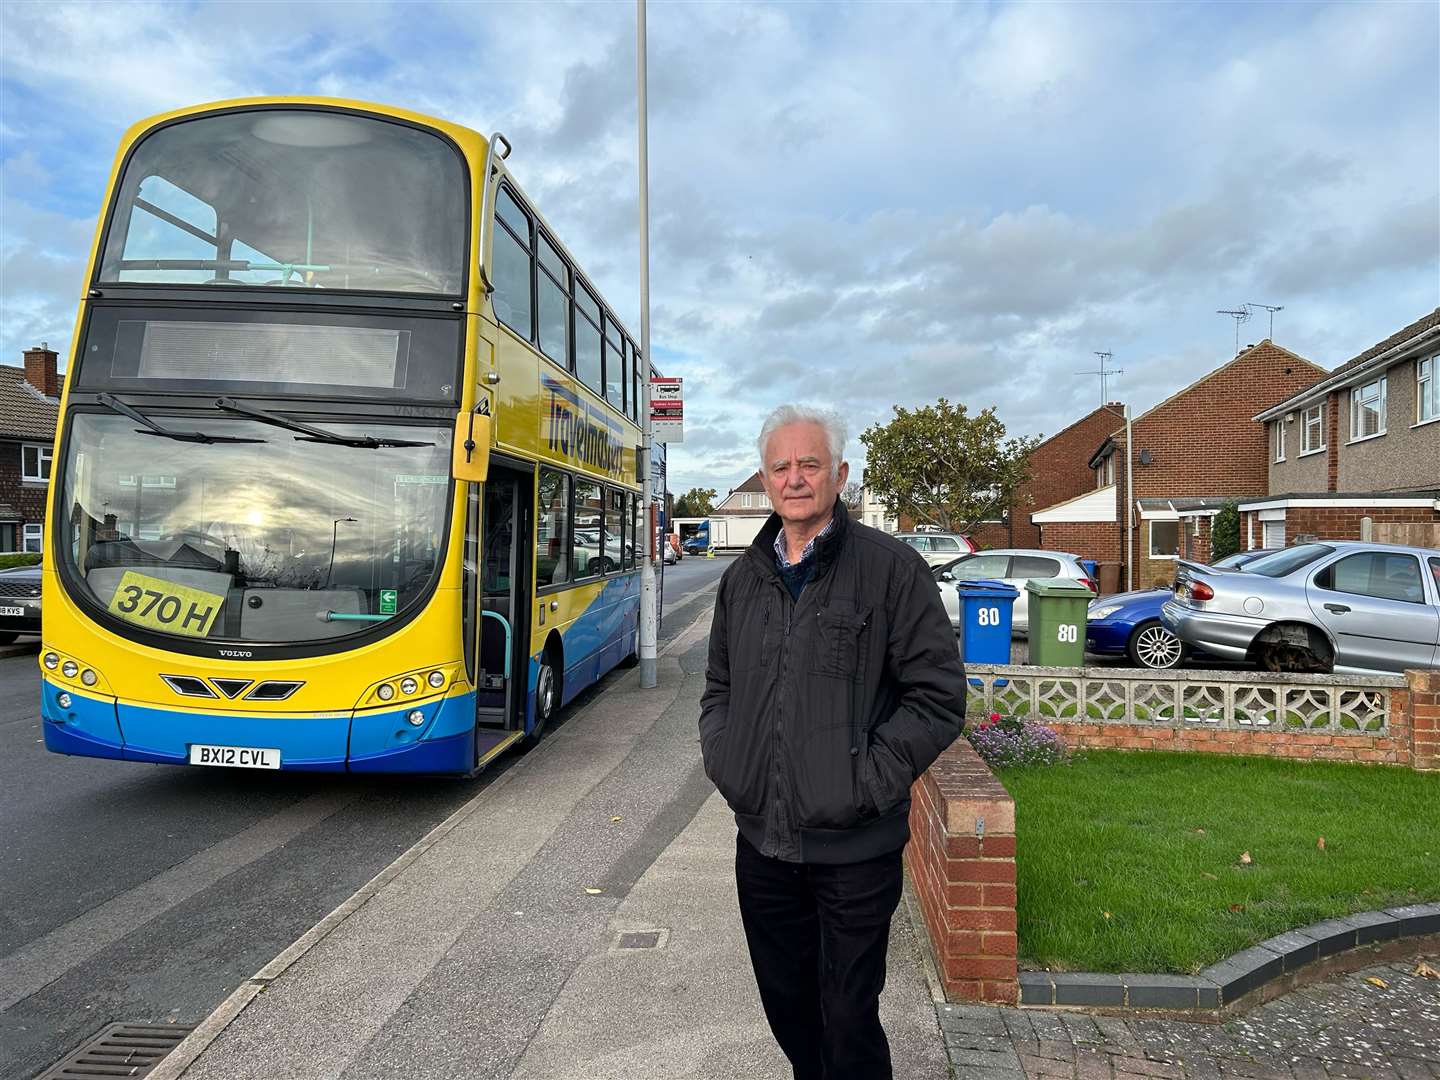 Cllr Roger Truelove standing in front of one of the school buses